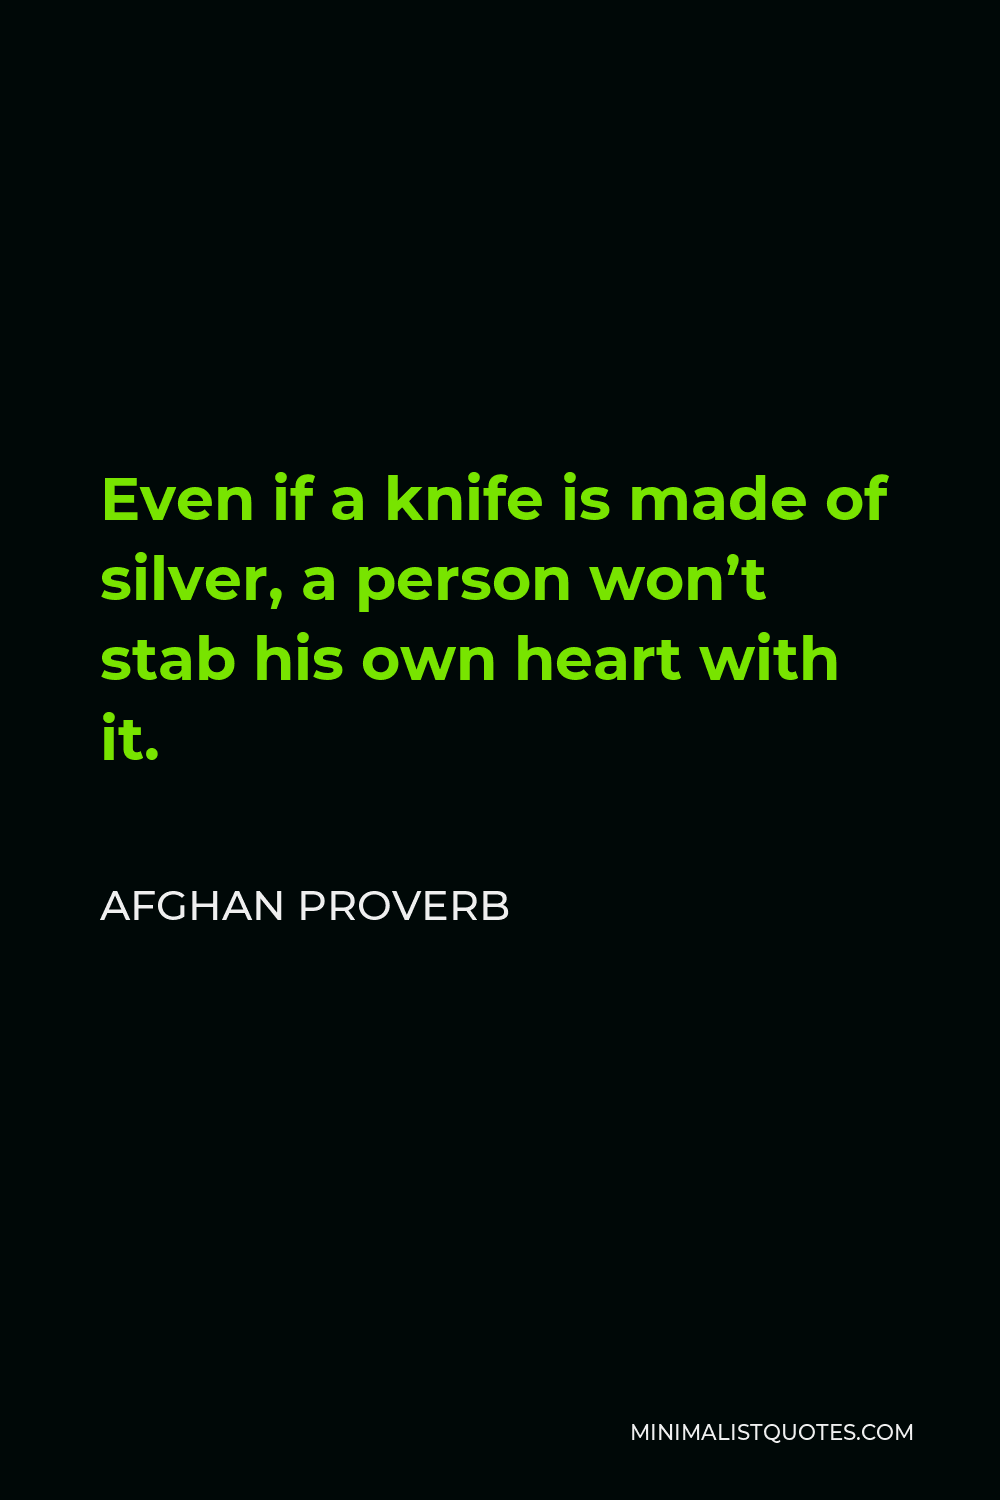 Afghan Proverb Quote - Even if a knife is made of silver, a person won’t stab his own heart with it.